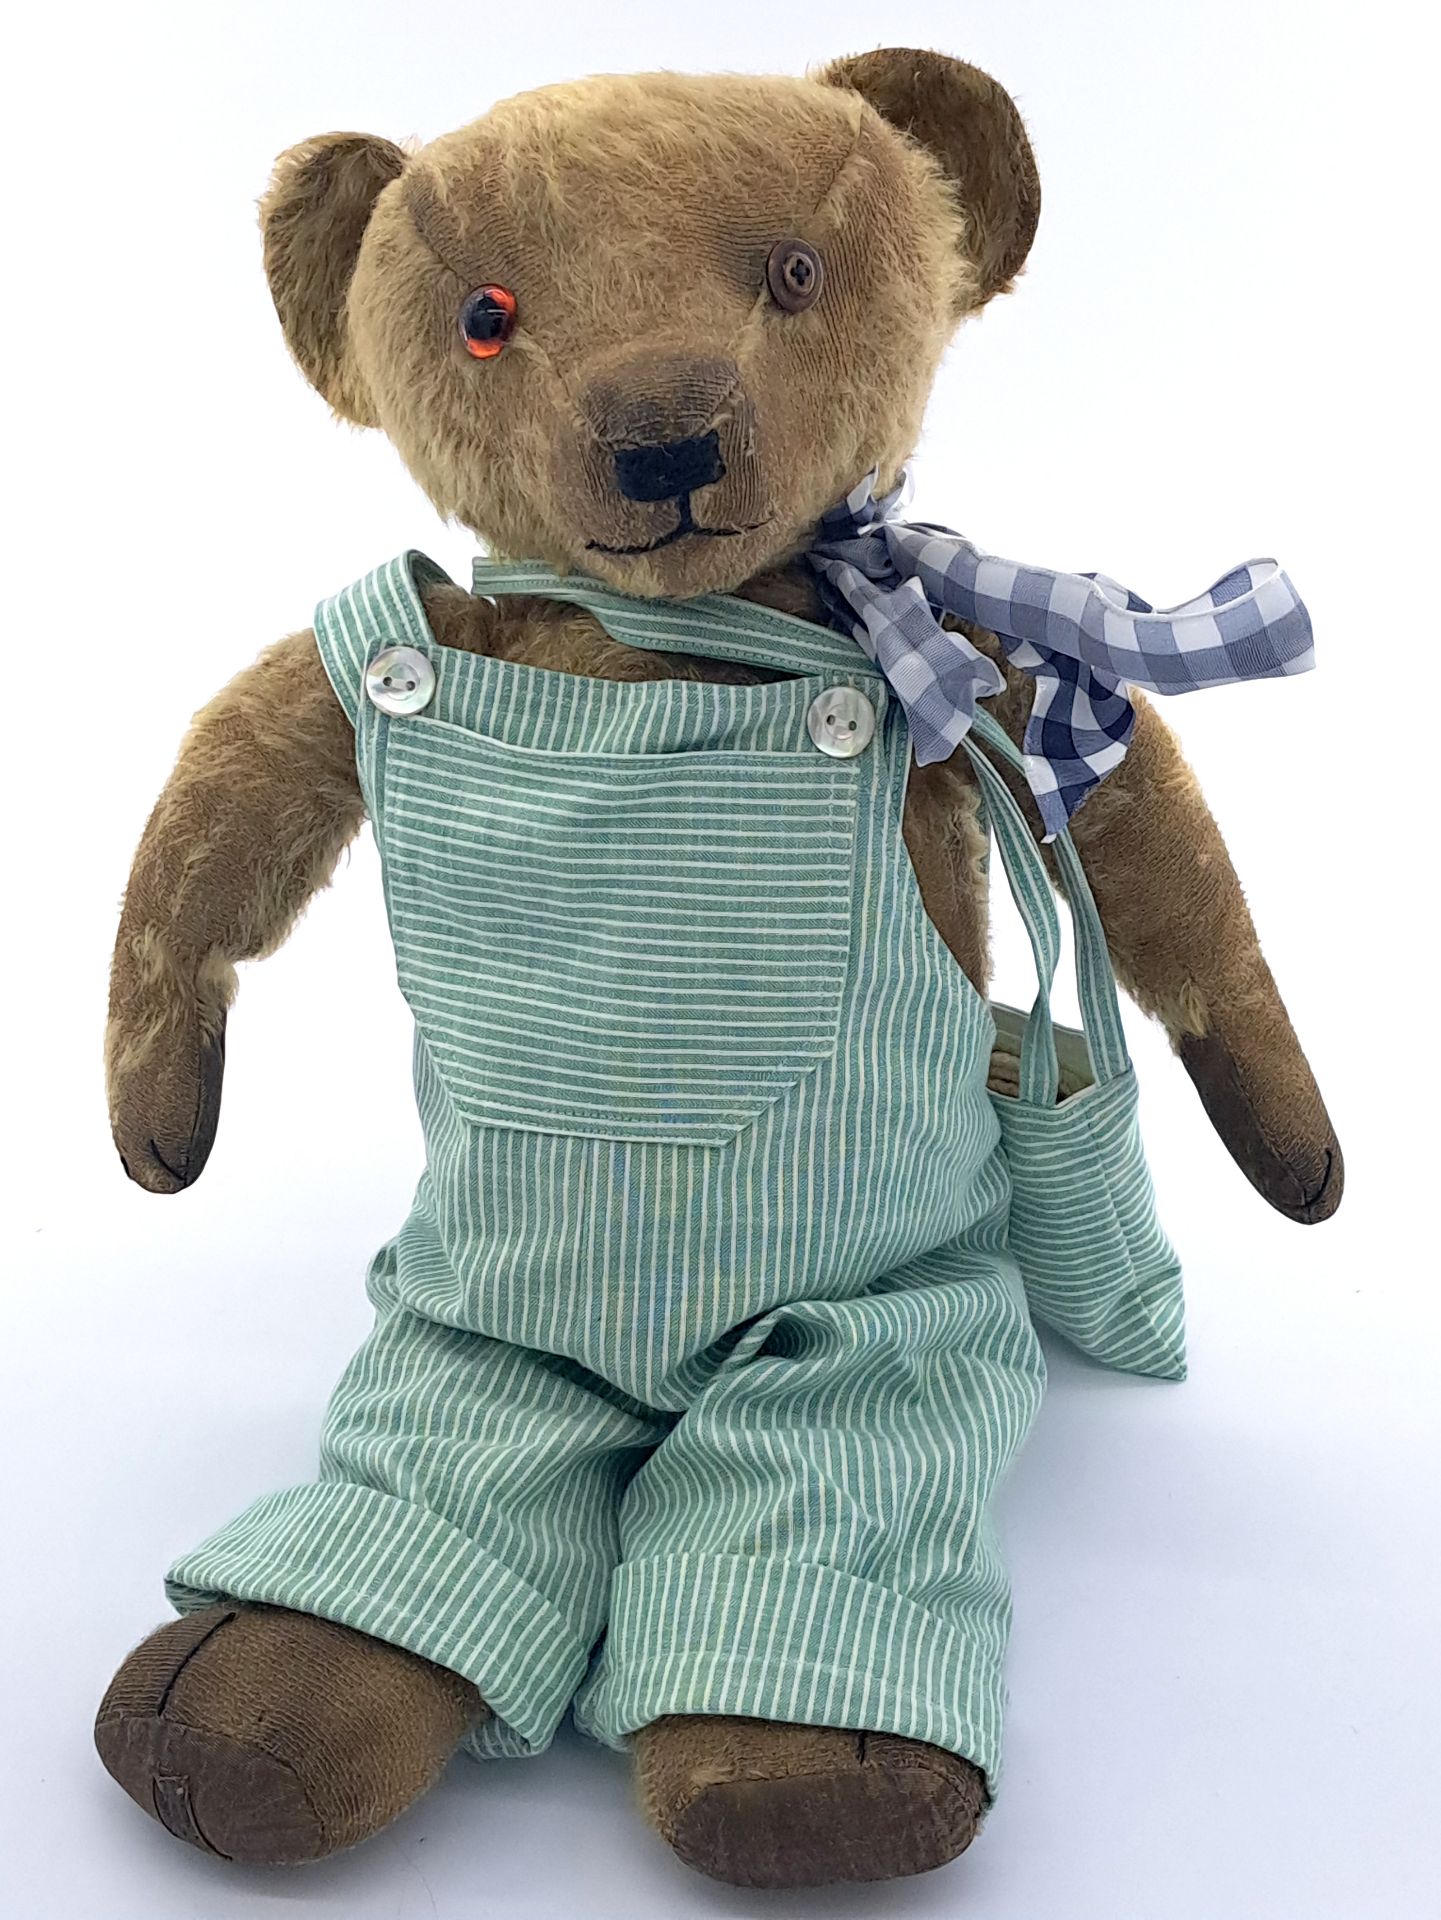 Merrythought vintage teddy bear - Image 2 of 2